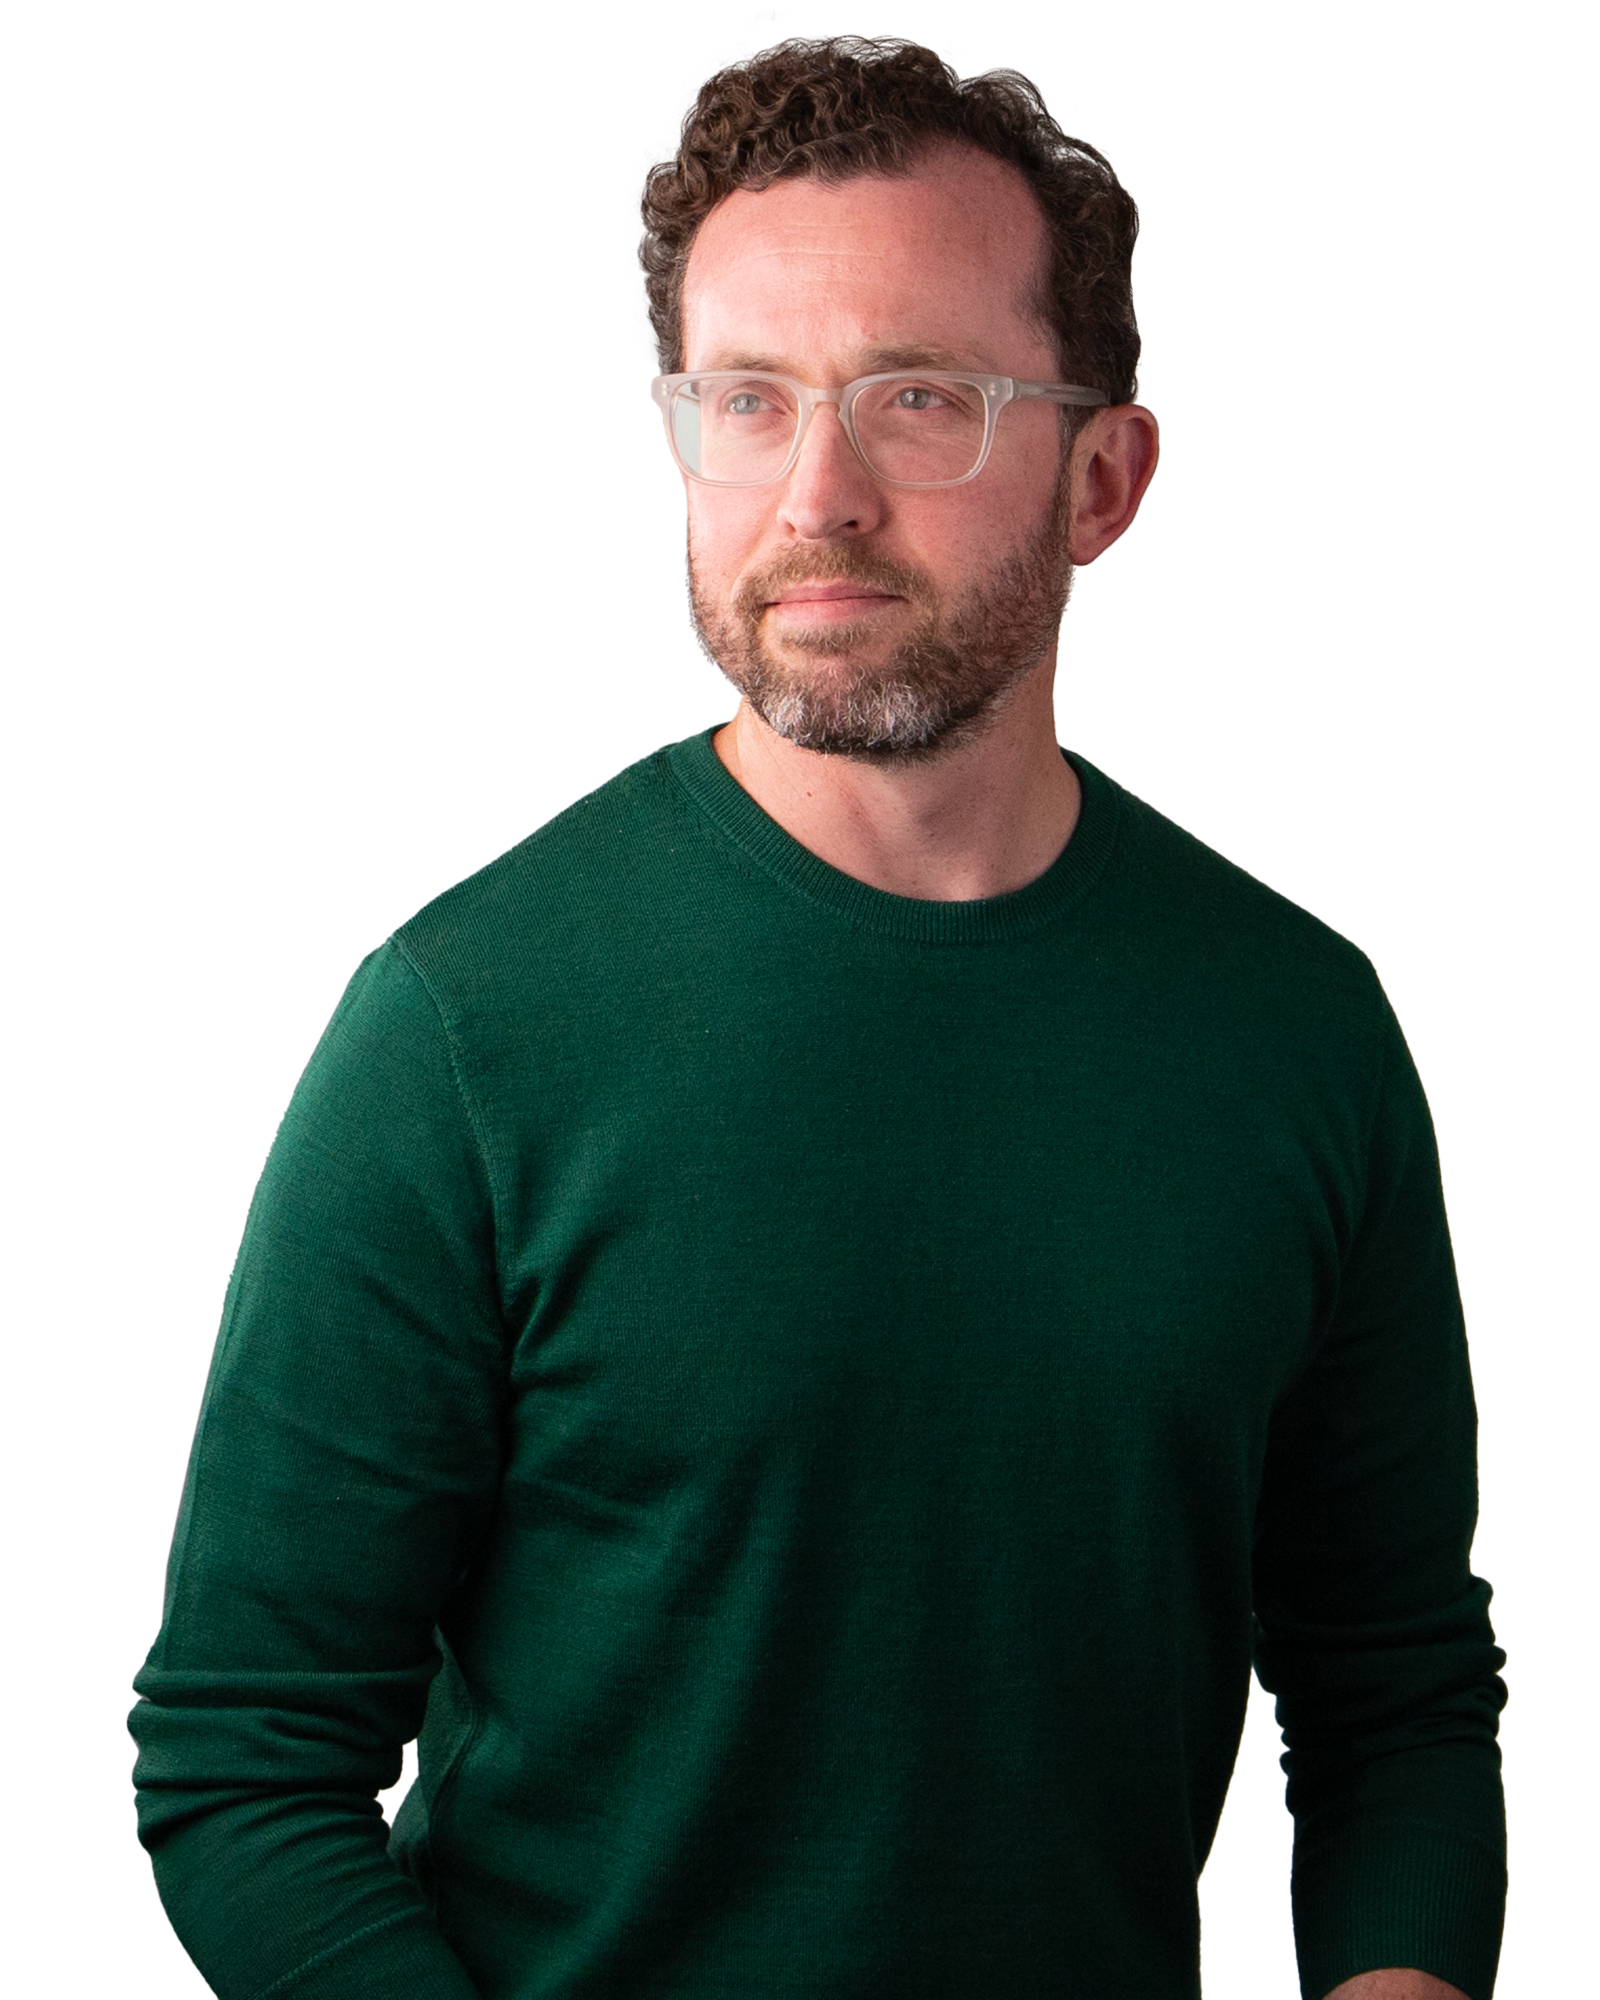 Man wearing a green jumper and clear glasses